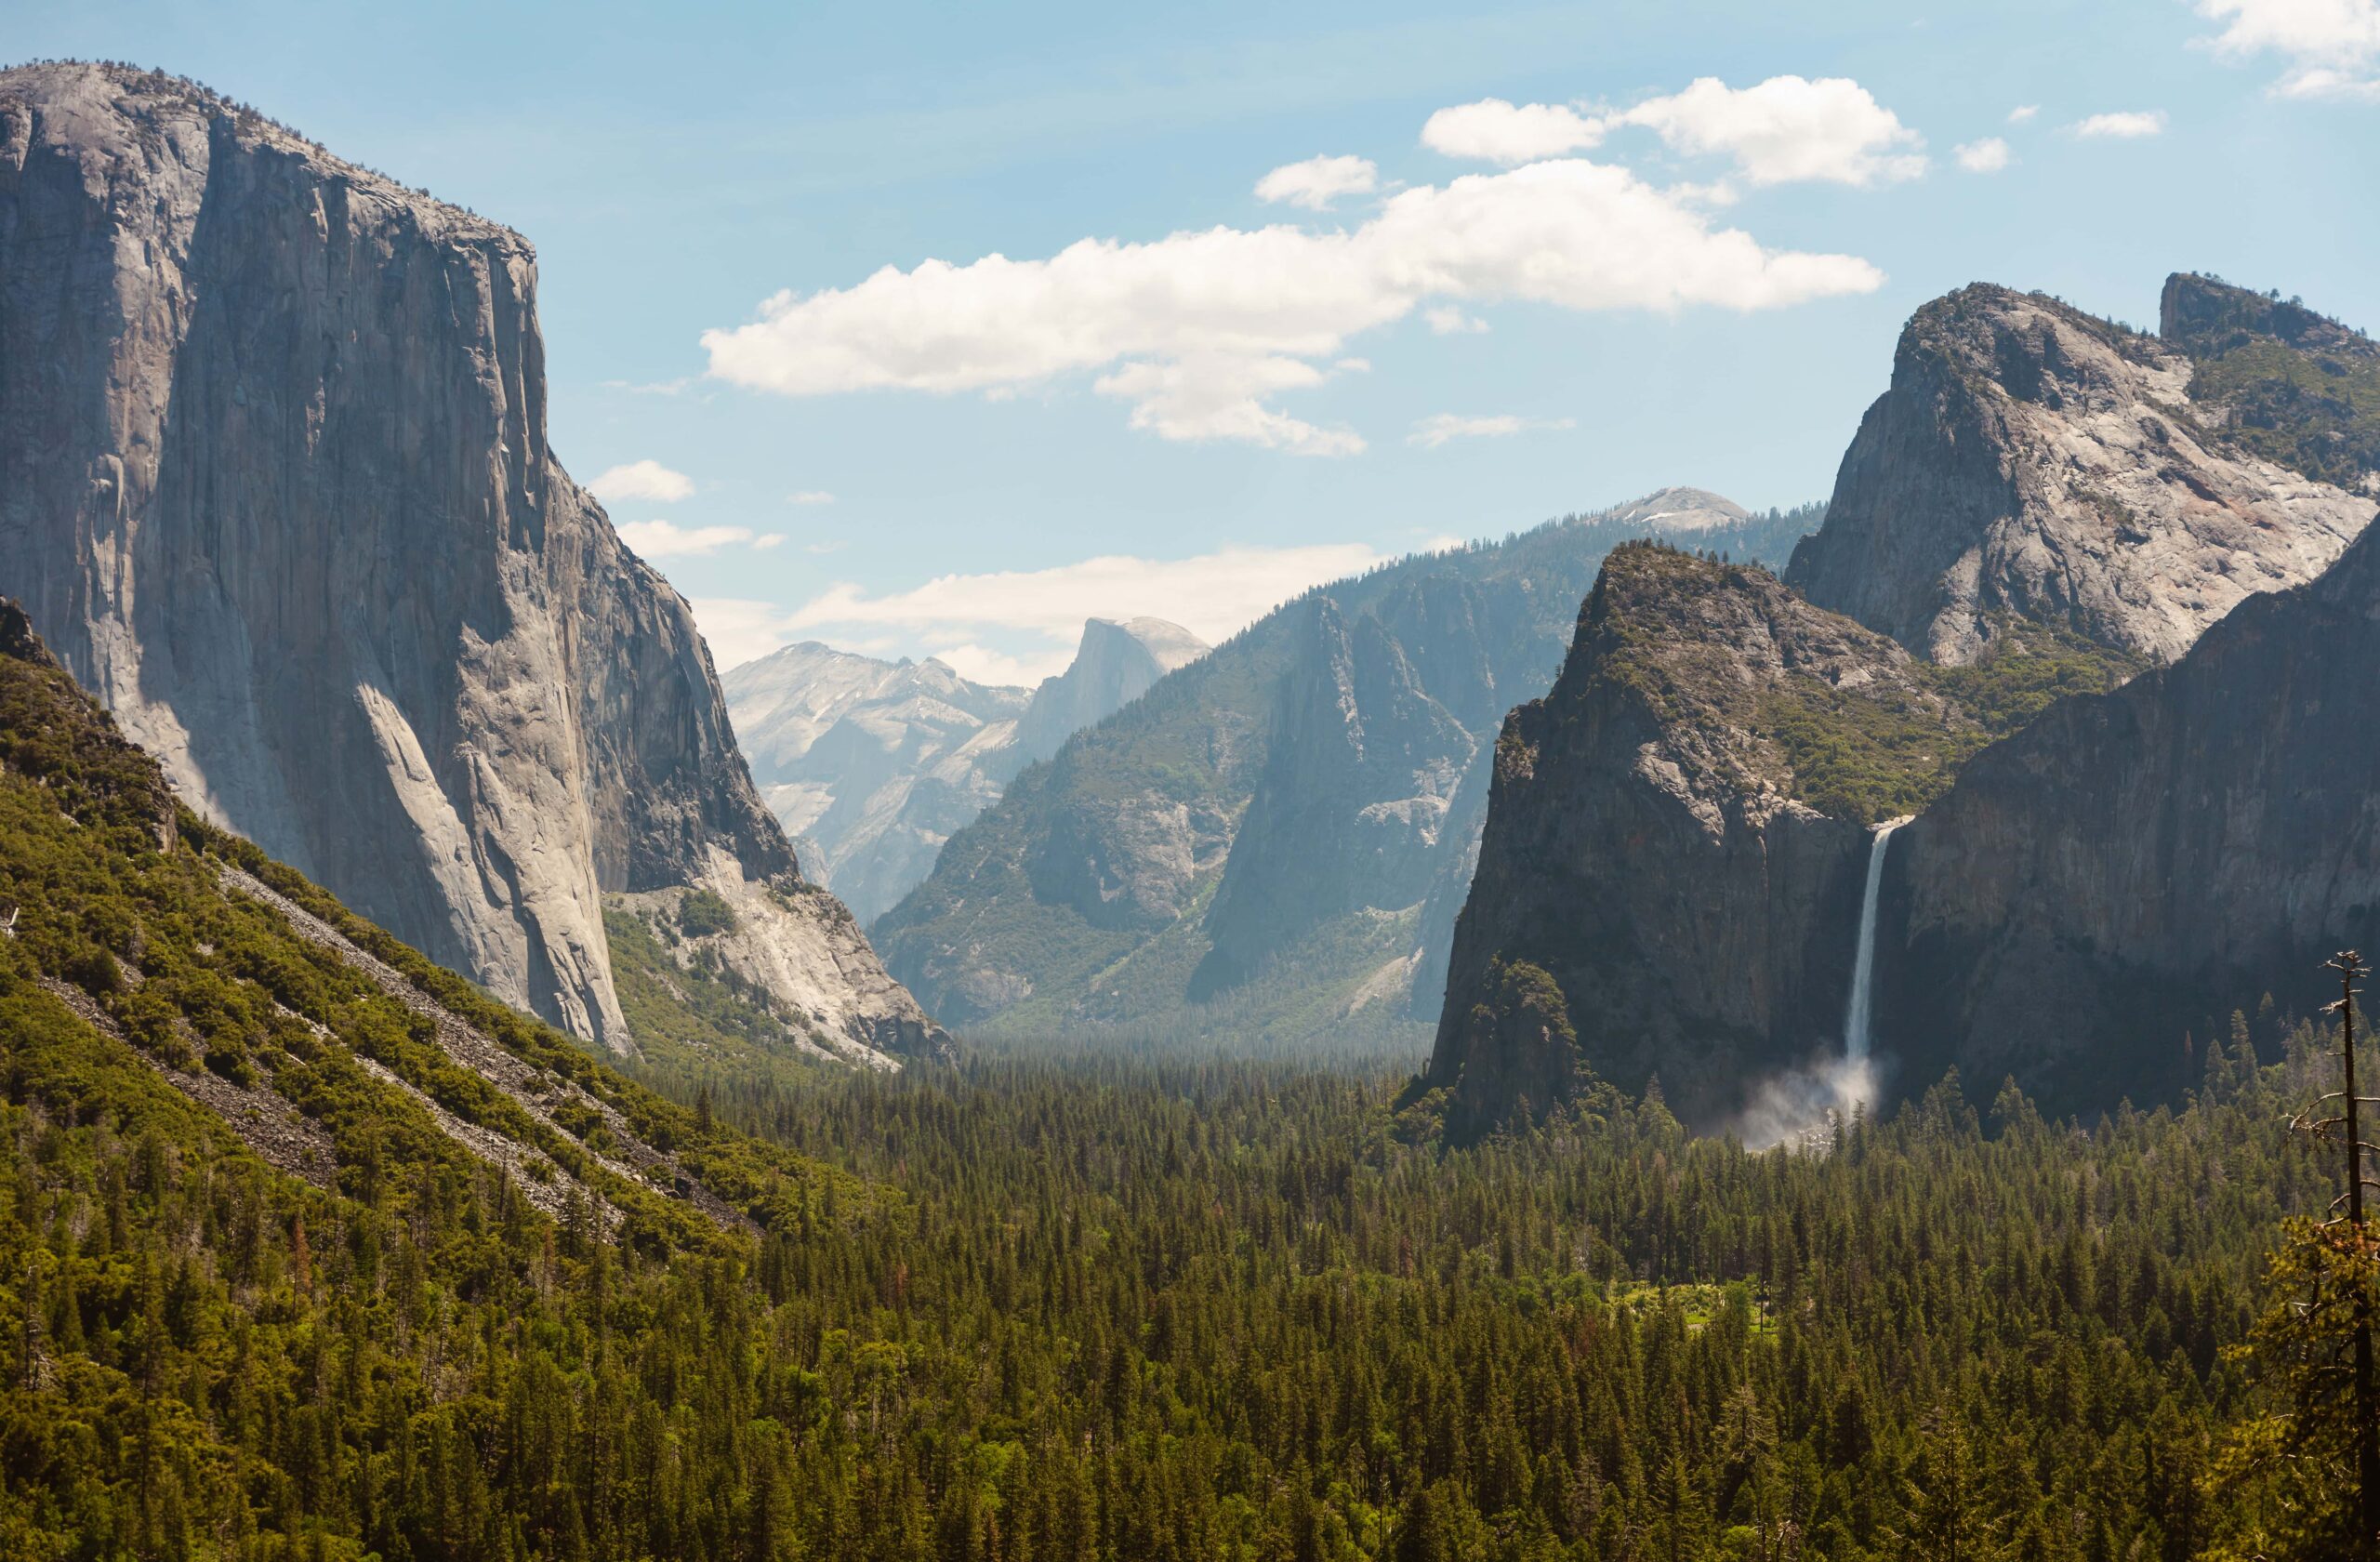 The image shows a scenic view of Yosemite Valley, with El Capitan on the left, Bridalveil Fall in the center, and the Half Dome in the distant background, under a blue sky with scattered clouds.